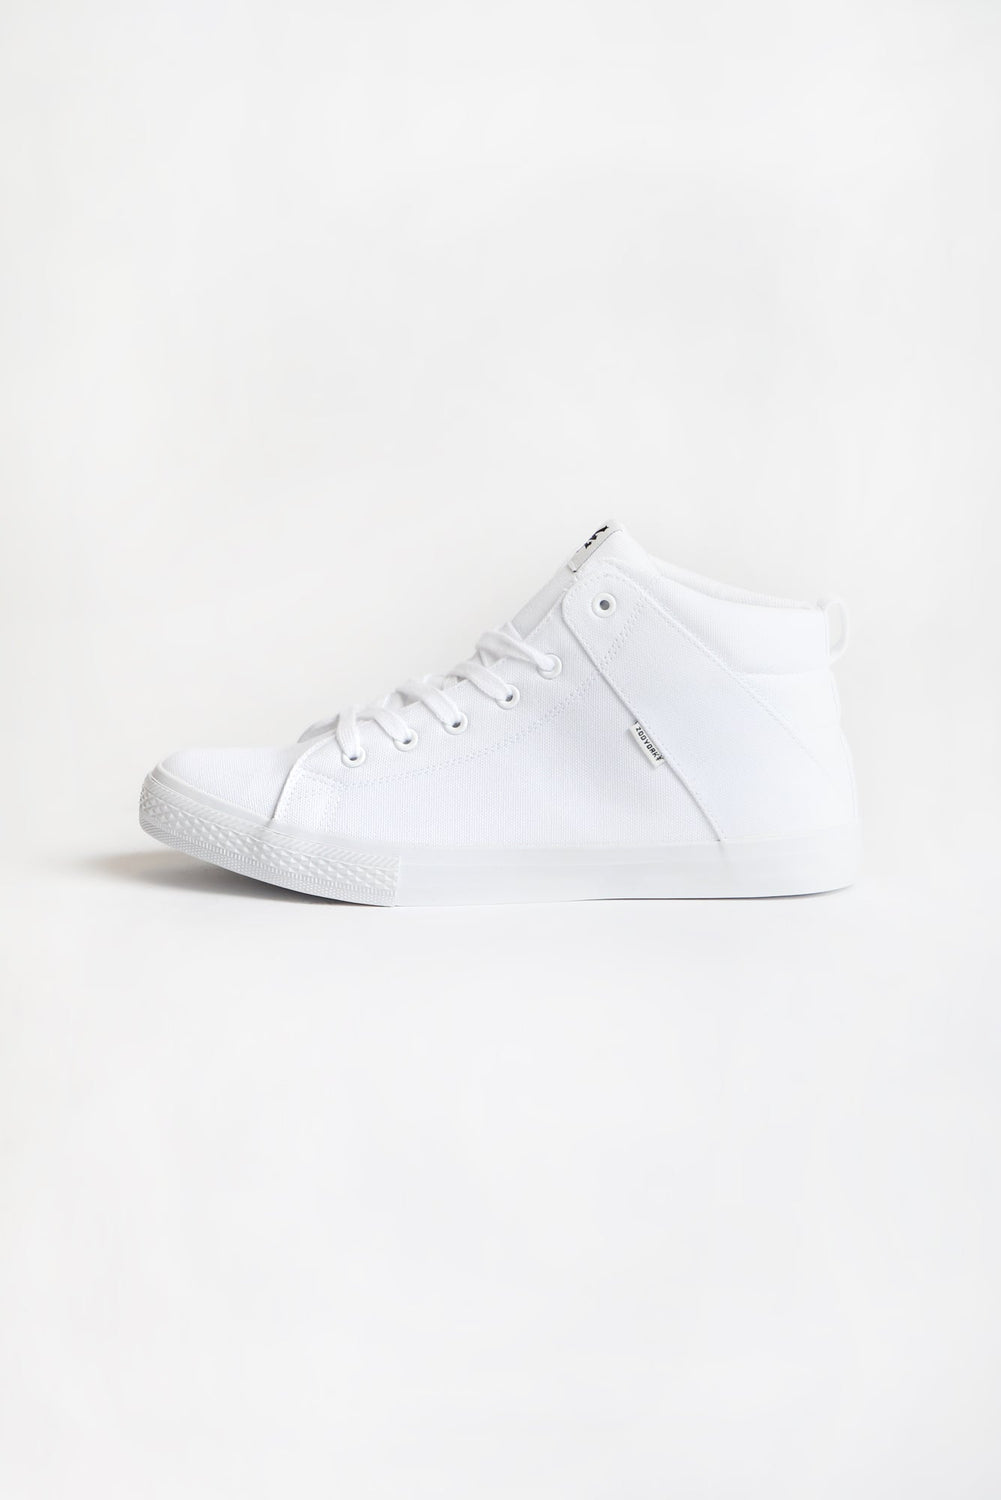 Zoo York Youth White Mid Tops Zoo York Youth White Mid Tops